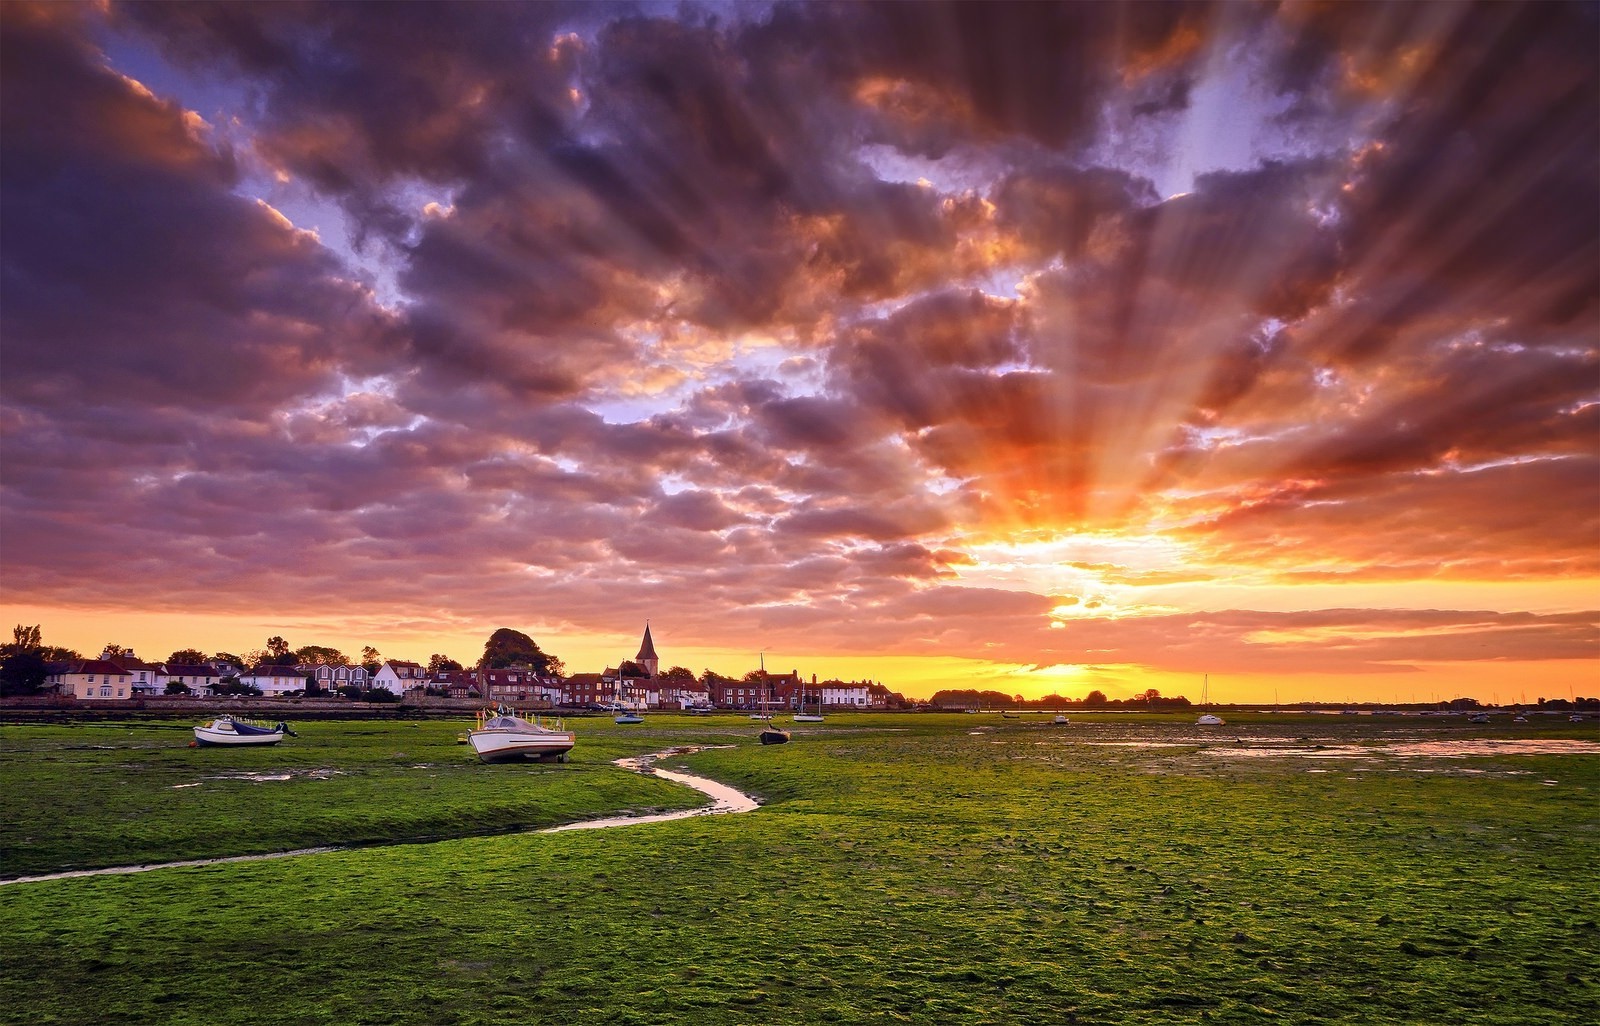 nature, Landscape, Photography, Sun Rays, Town, Sunset, Sky, Clouds, Boat, Colorful, UK Wallpaper